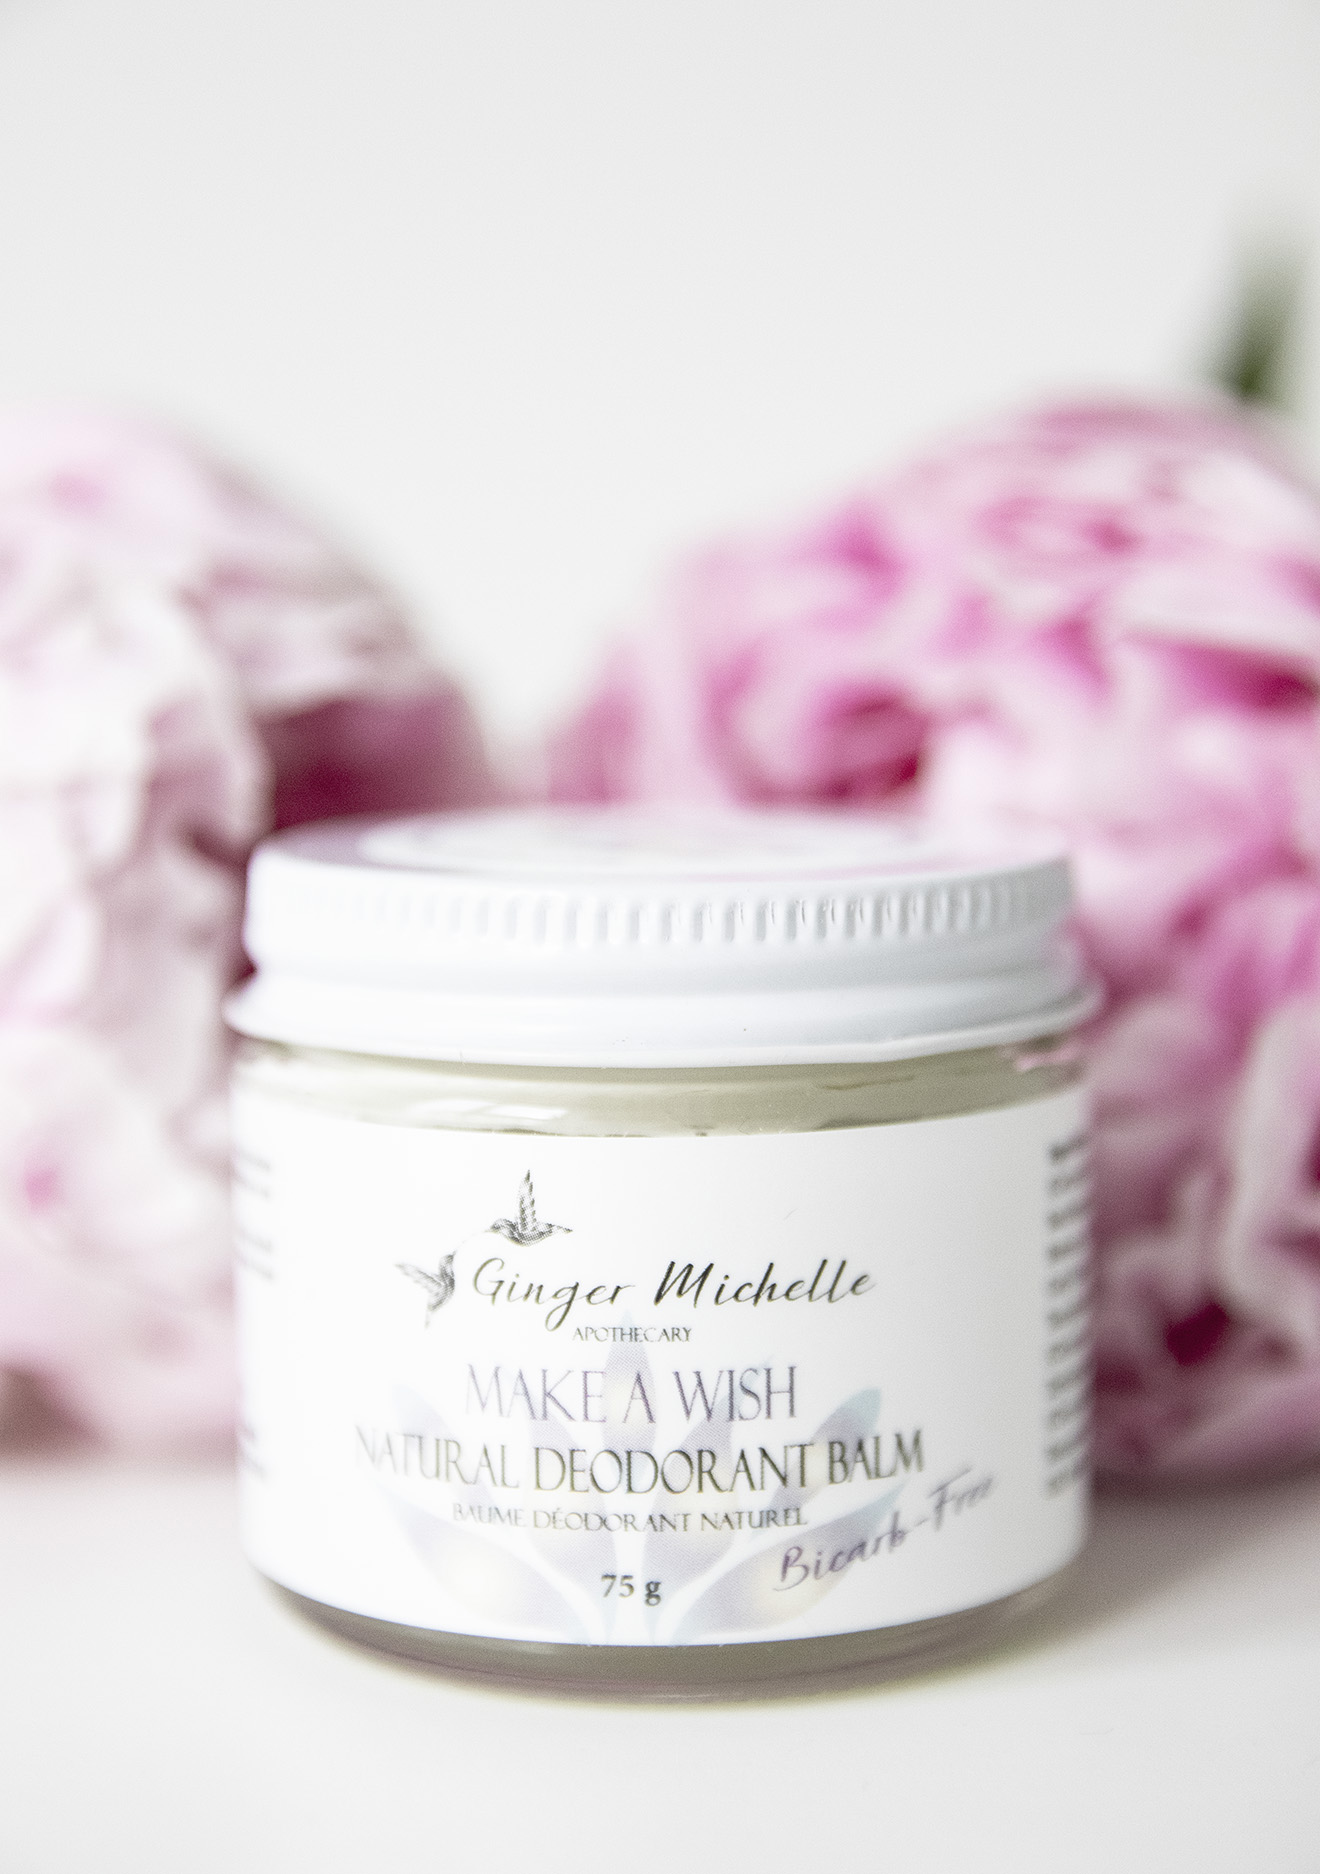 Ginger Michelle Apothecary Make A Wish Natural Deodorant Balm